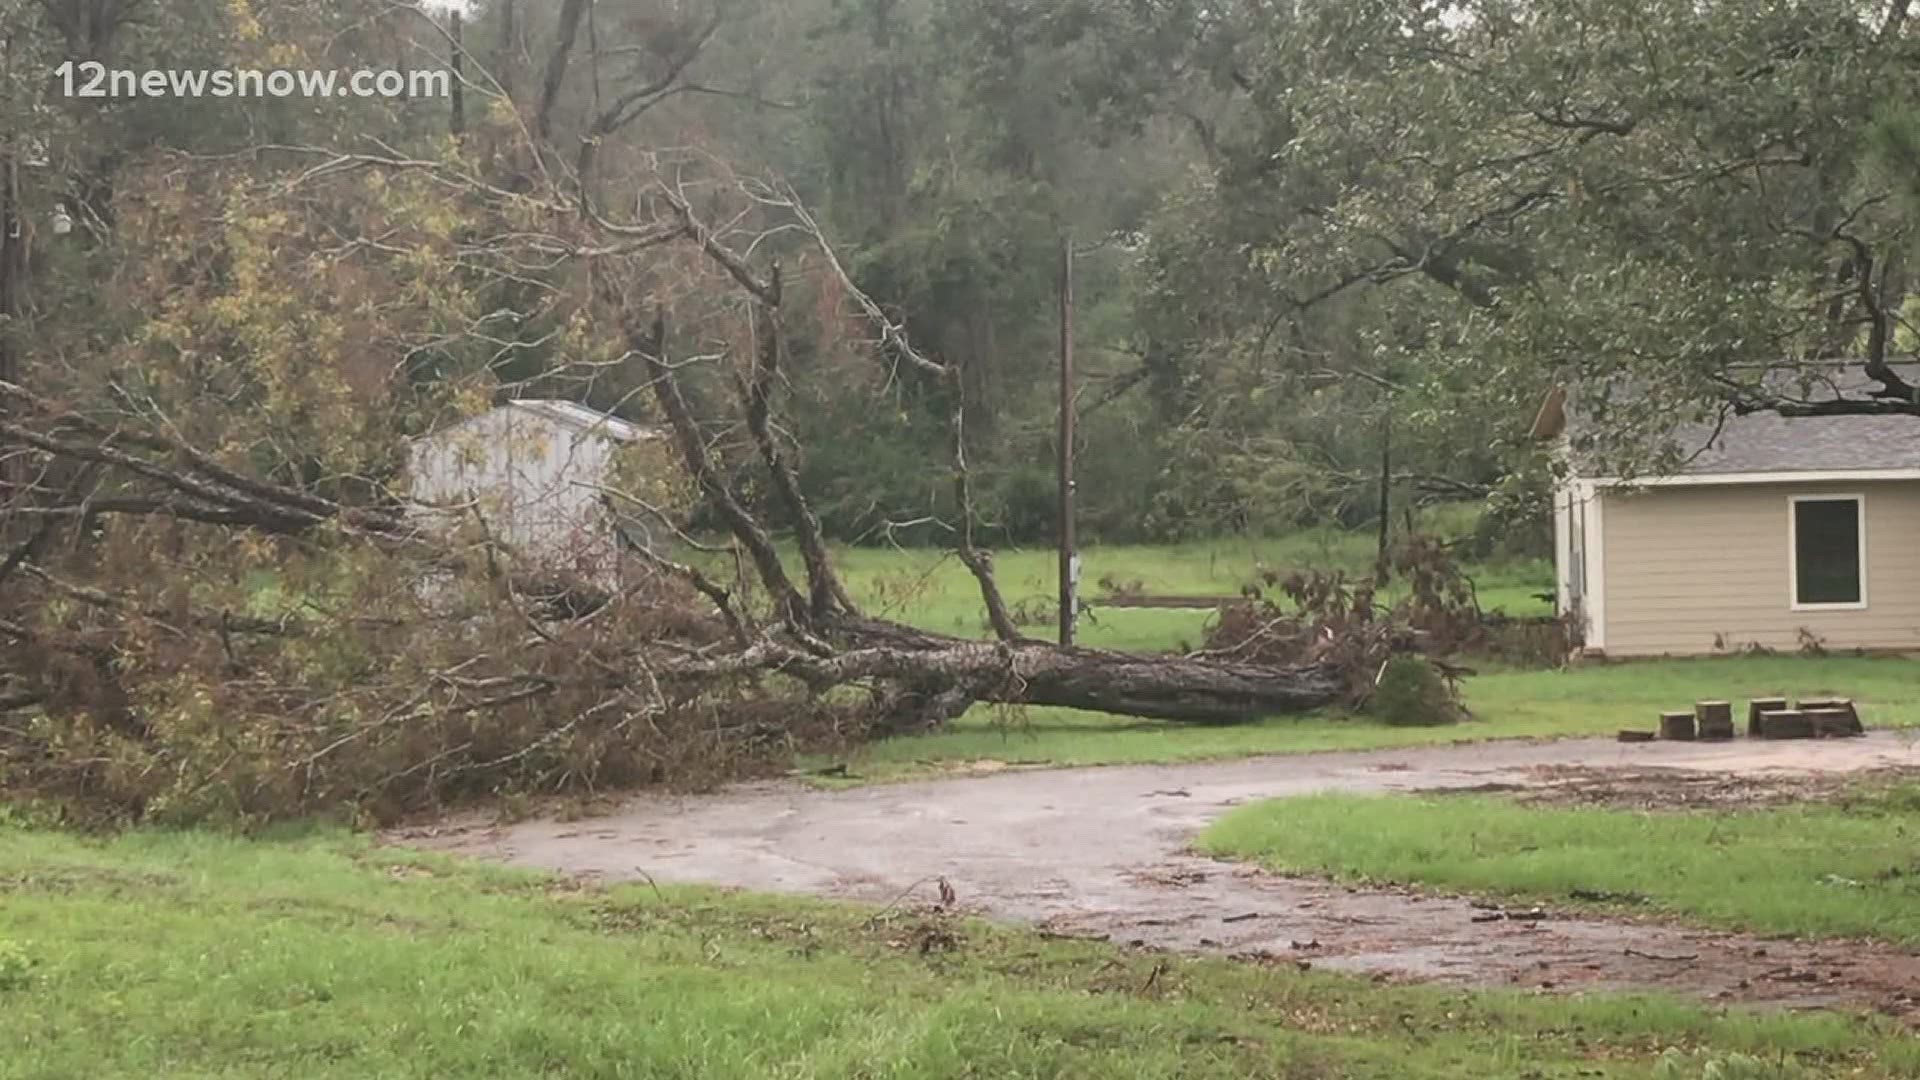 Trees and power lines are still down. Some residents in Newton County may see another week without power.